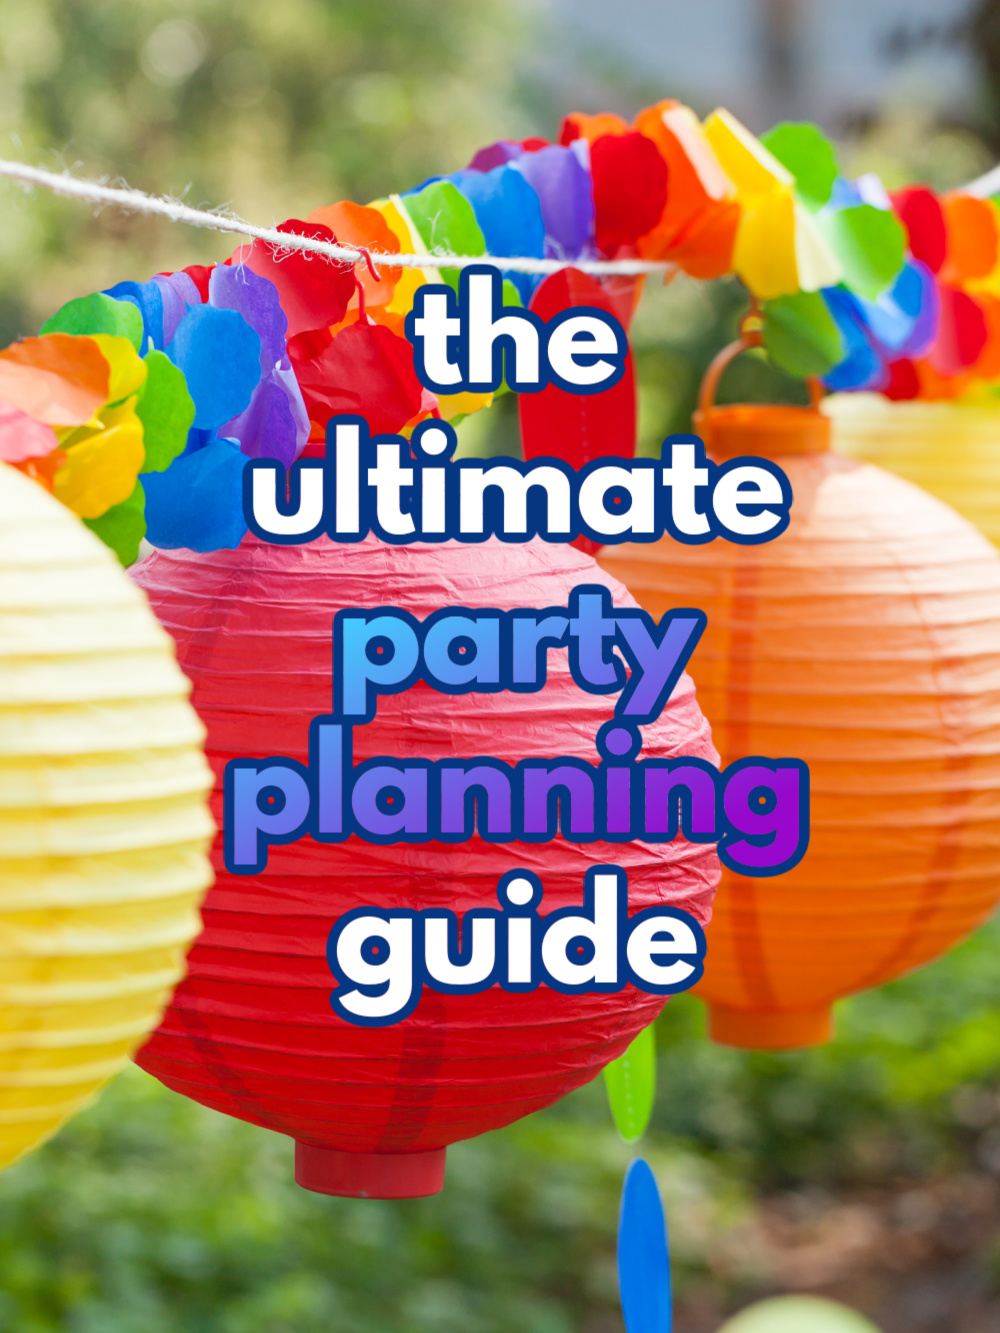 The ultimate party planning guide.